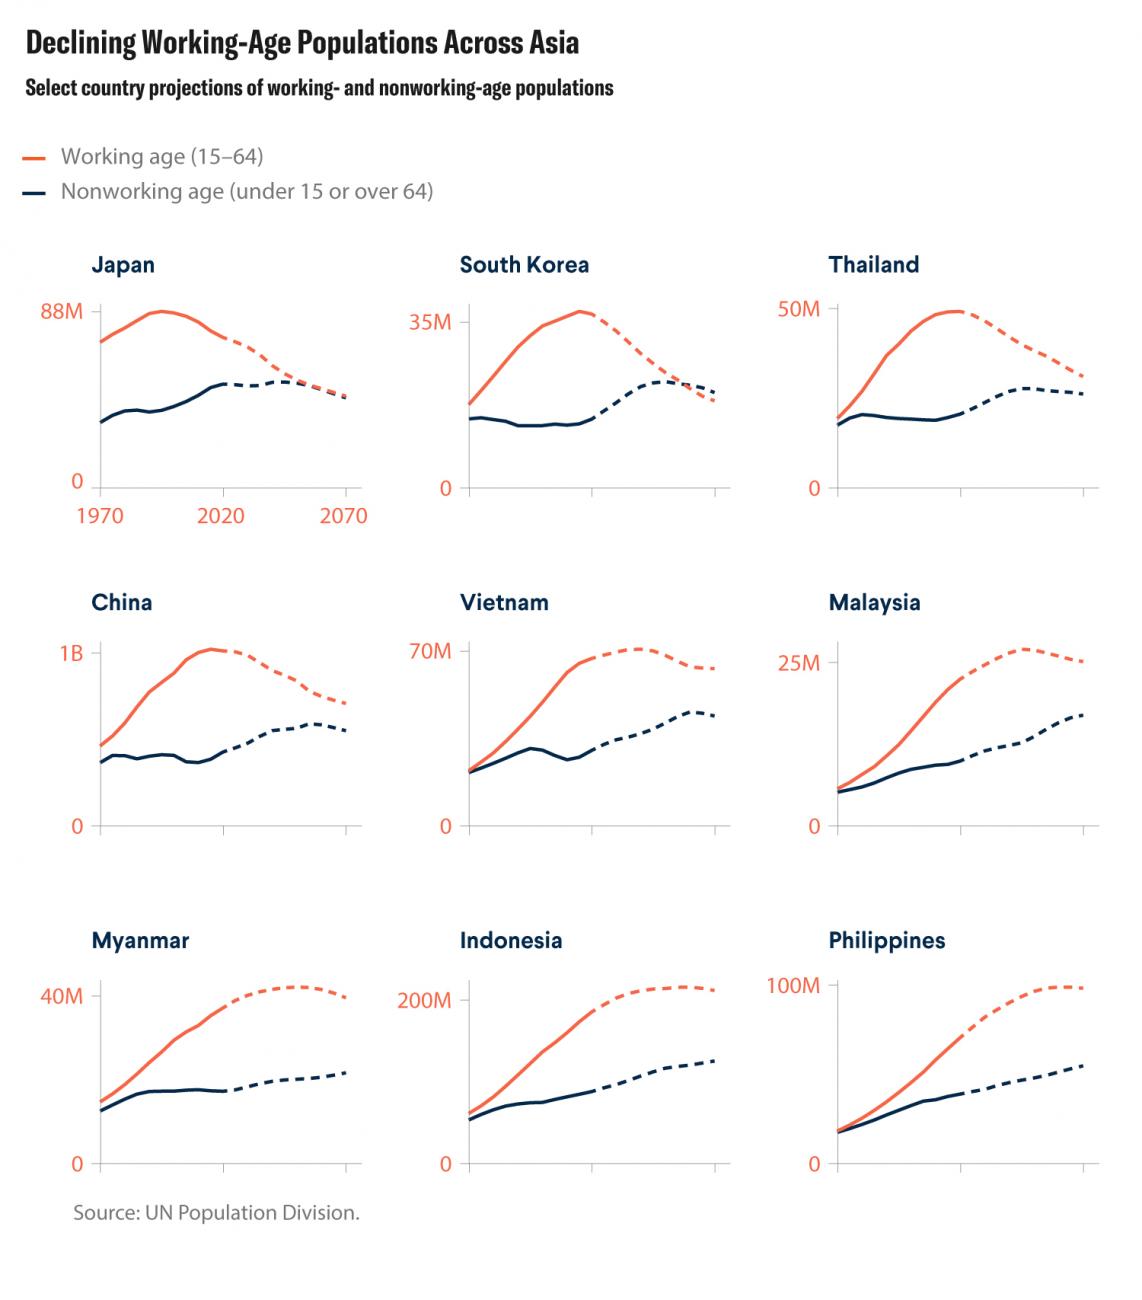 The image is a 3x3 grid of graphs, each showing one major Asian country and the historic and projected growth of its working- and nonworking-age populations over the hundred-year span. 